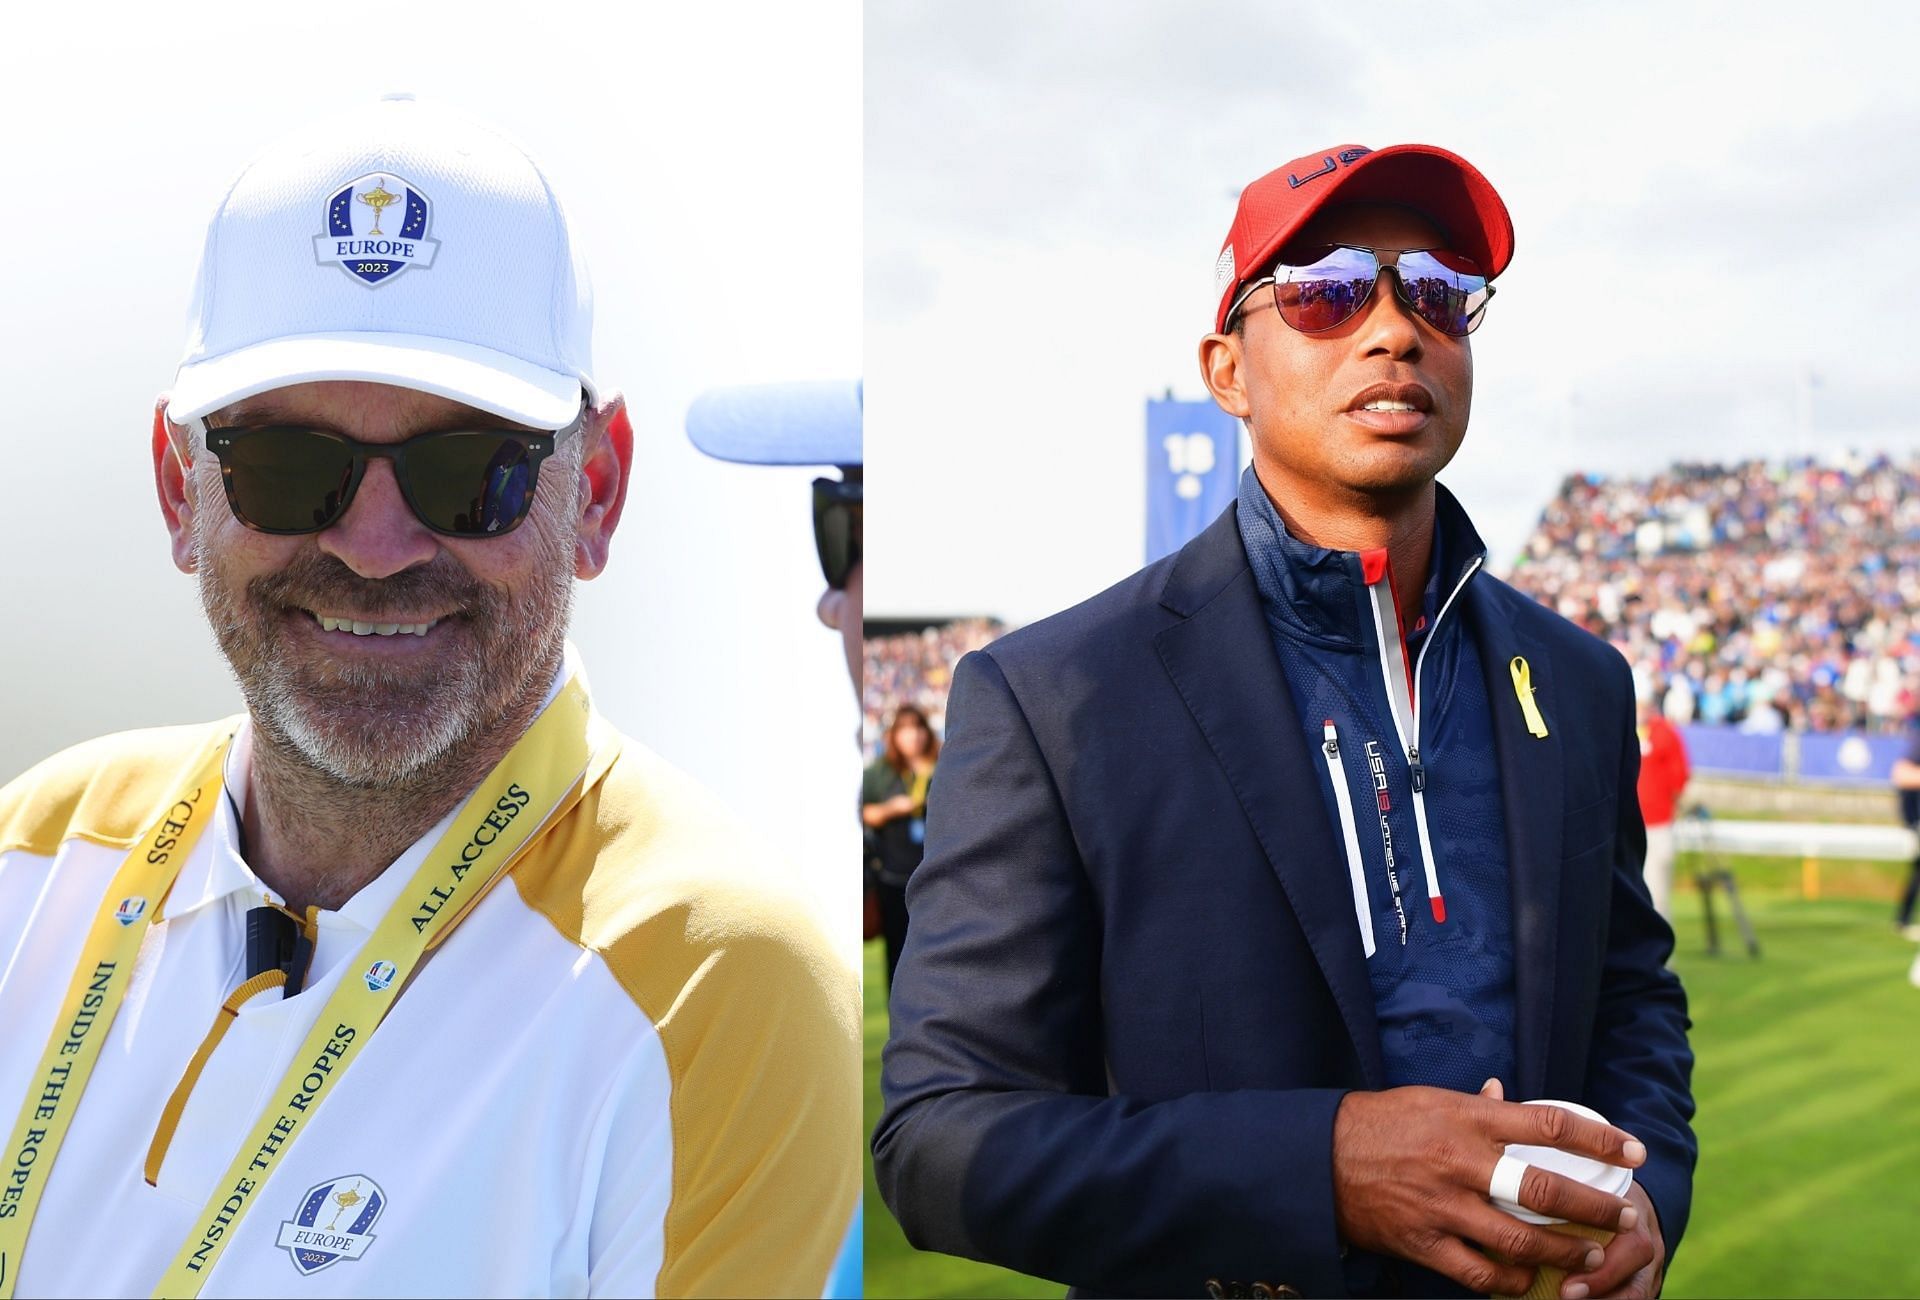 Thomas Bjorn and Tiger Woods 